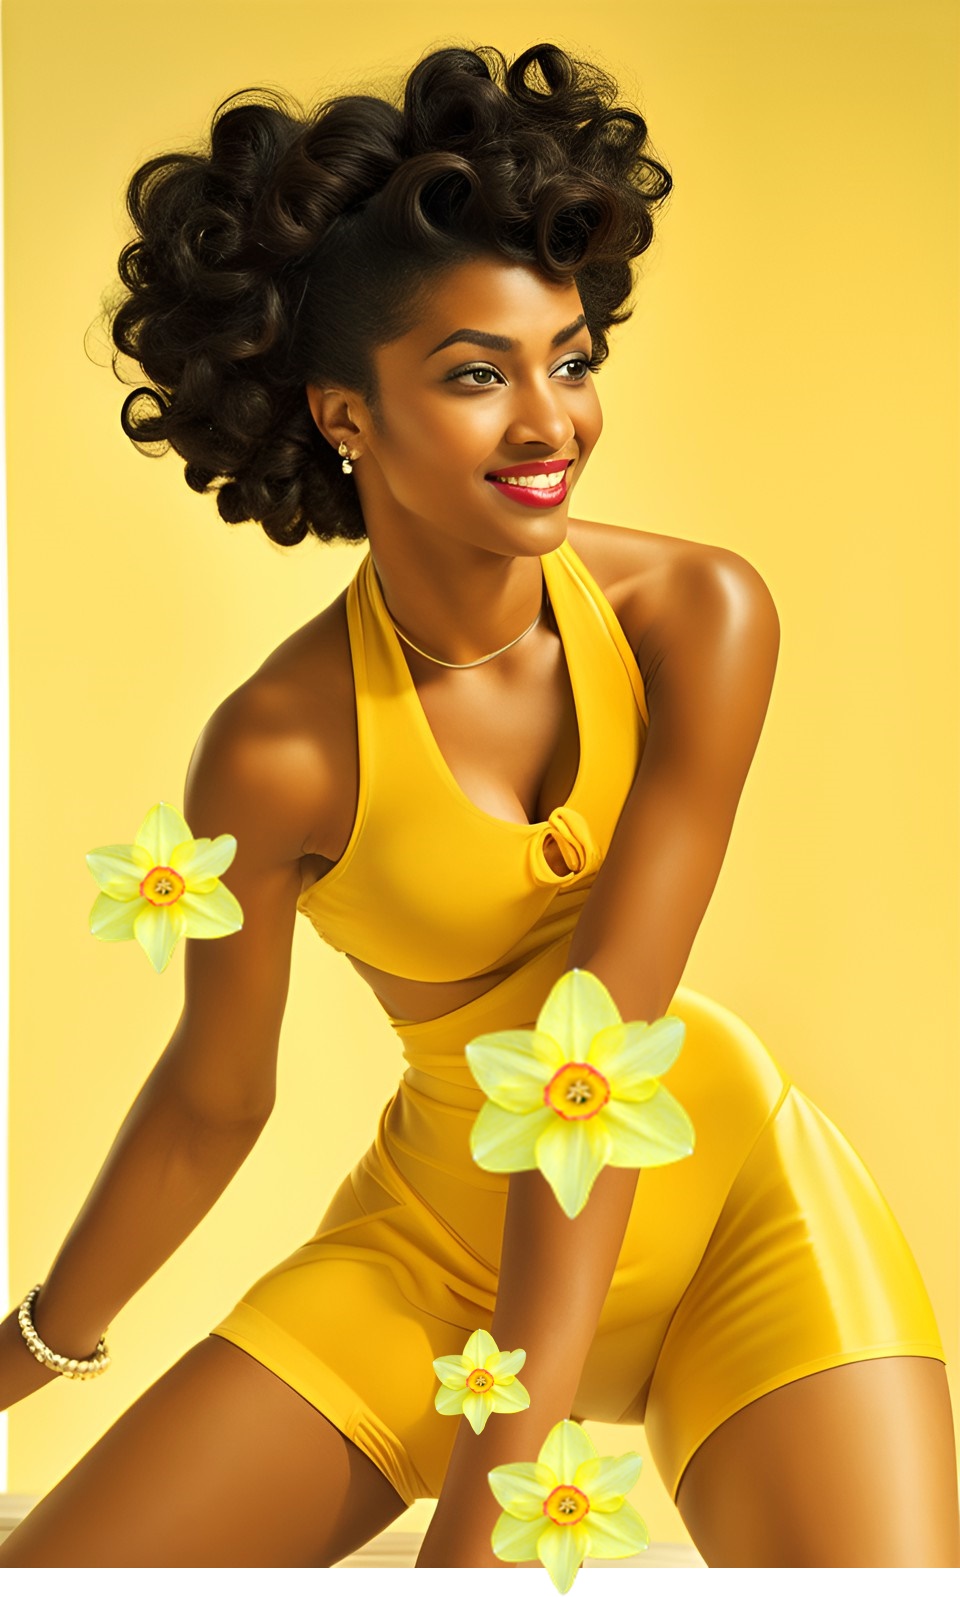 Mixed-race models pose in yellow sports outfit Dream137